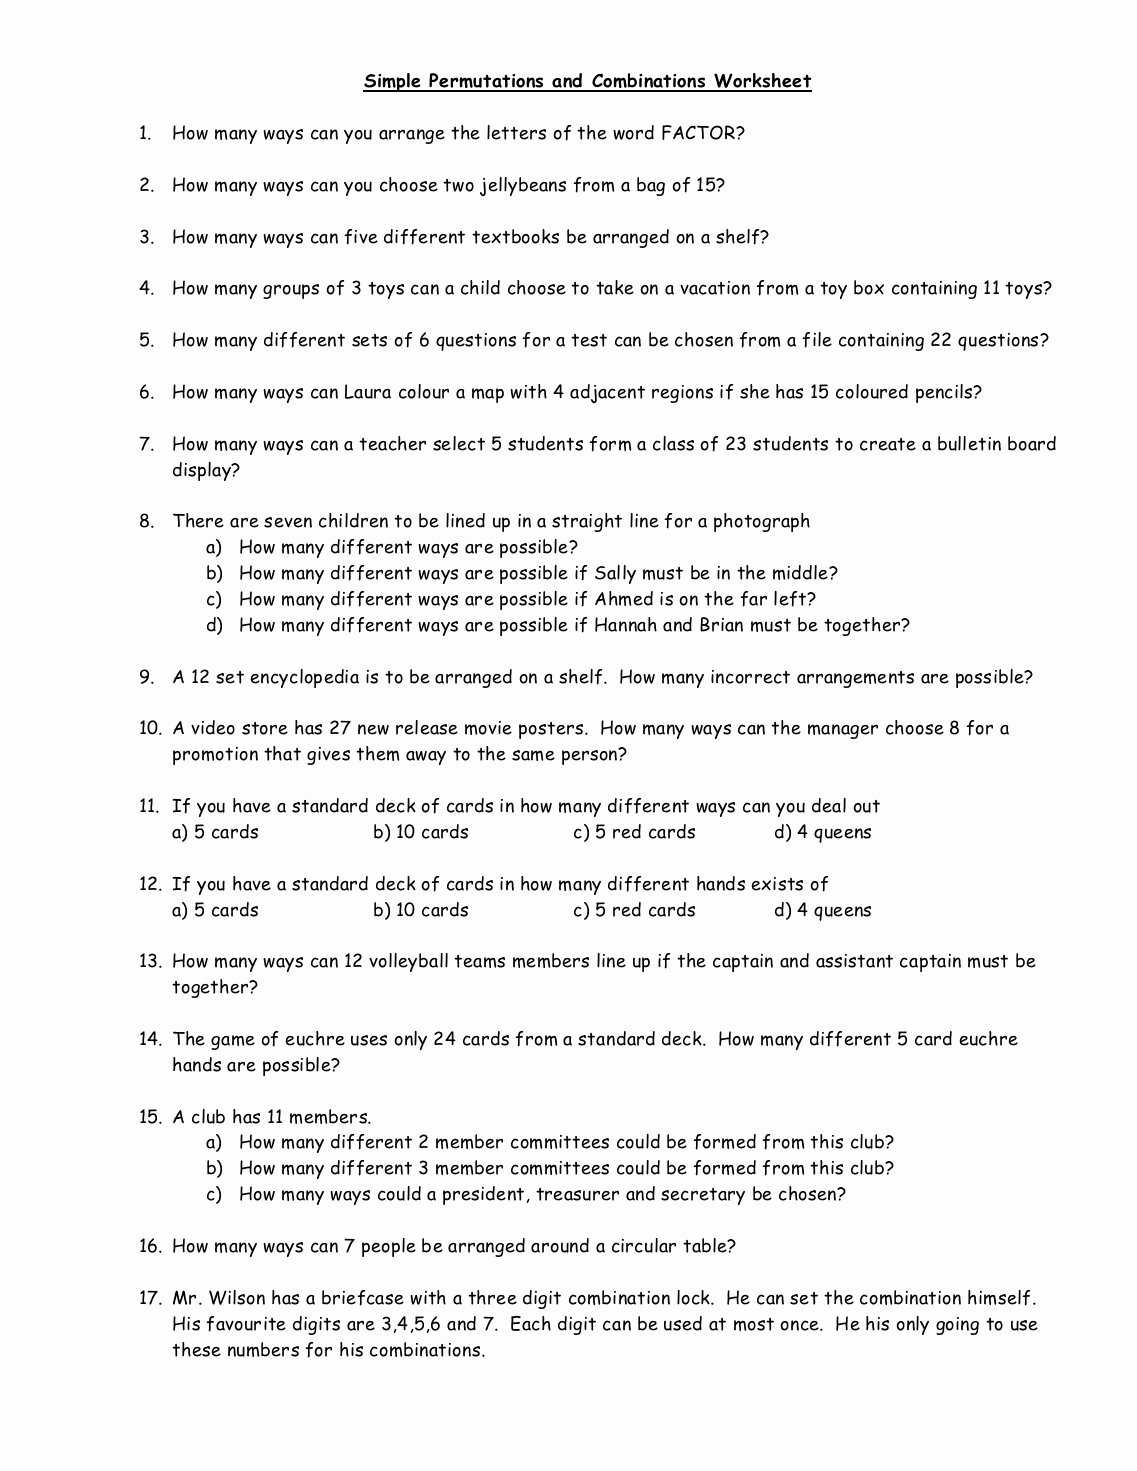 Printables Of Isabella S Combined Credit Report Worksheet Answers For Isabella039S Combined Credit Report Worksheet Answers